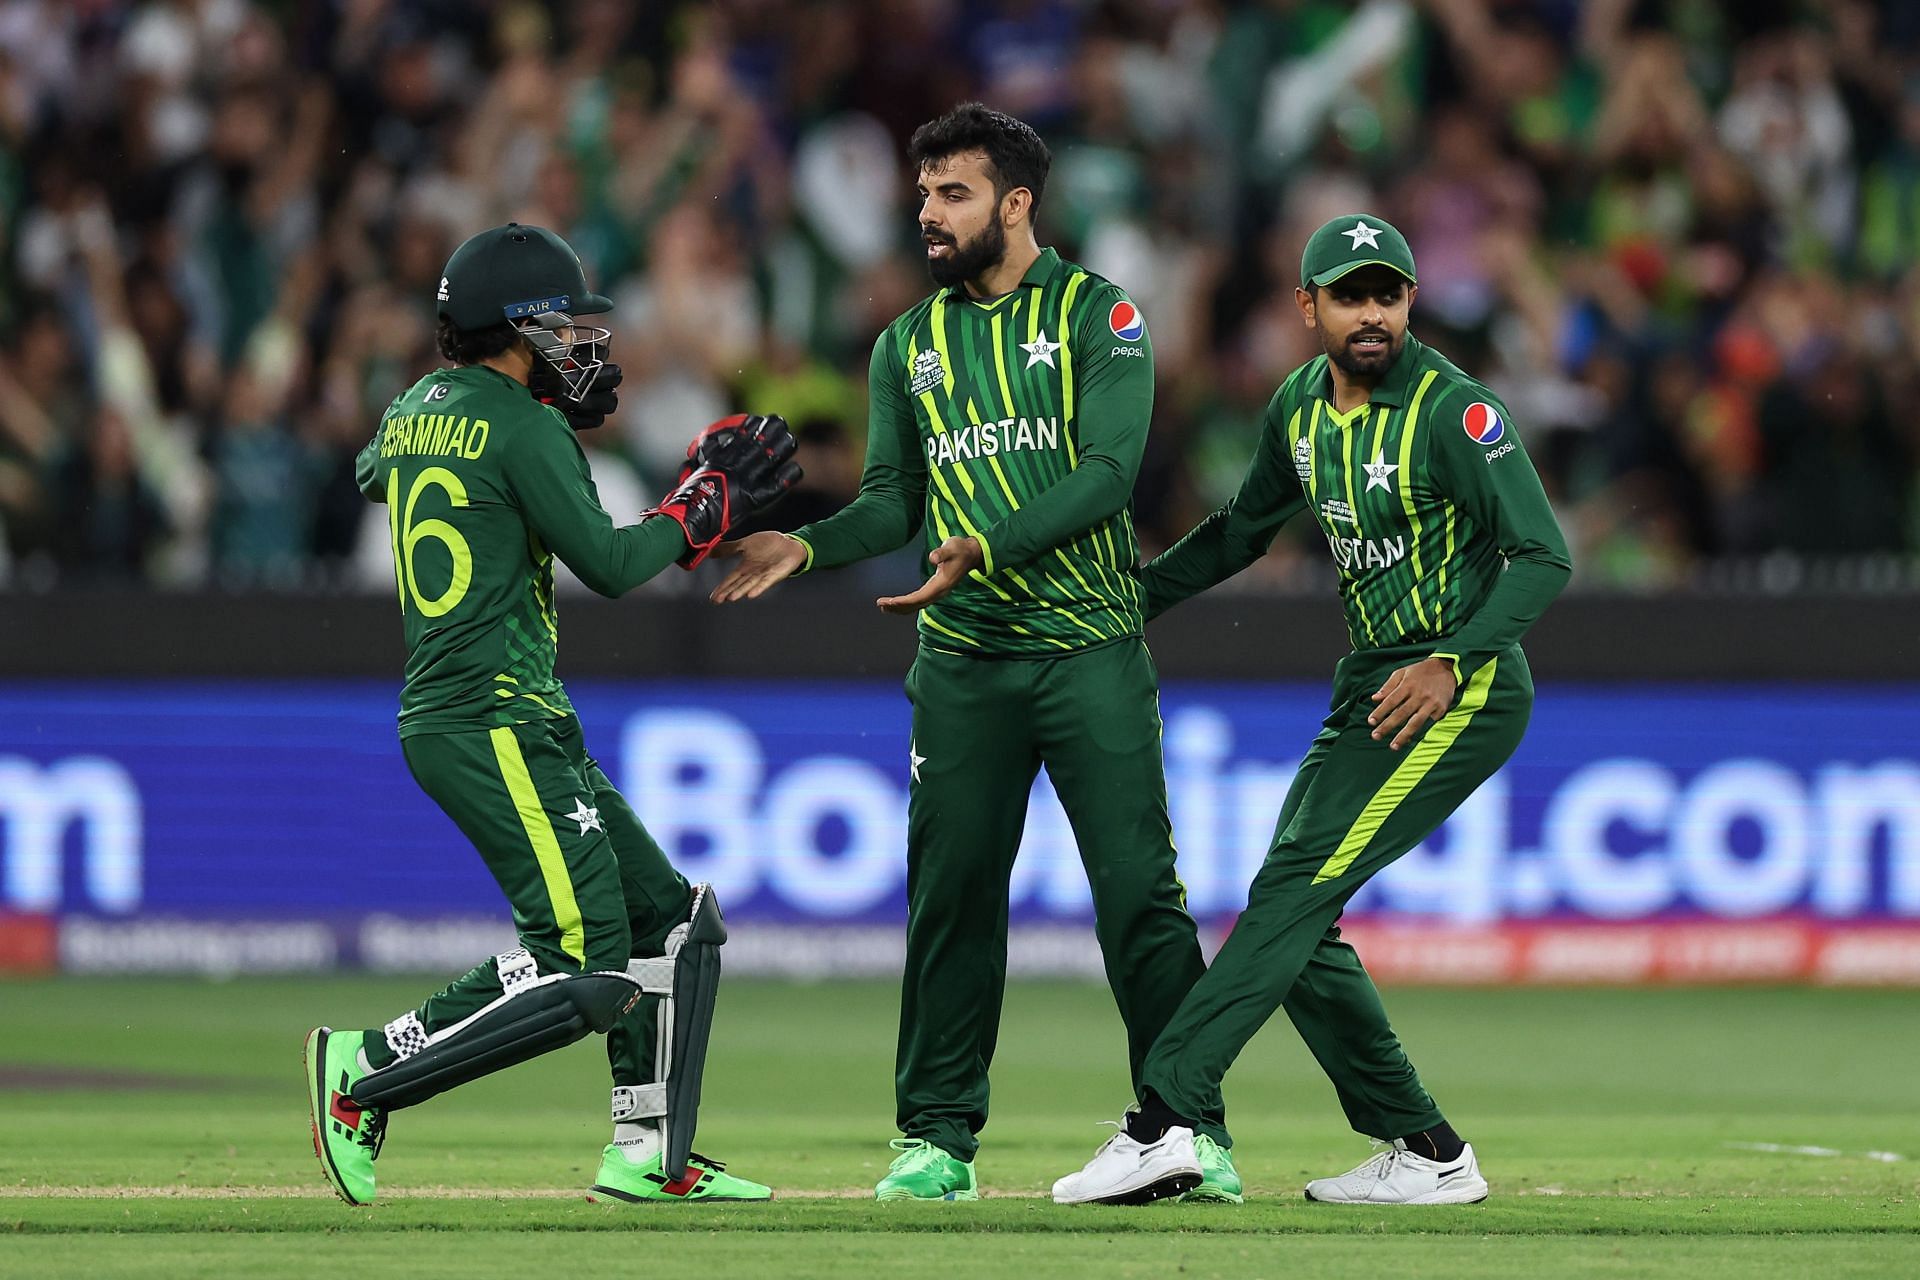 Shadab Khan bowled four economical overs in the final